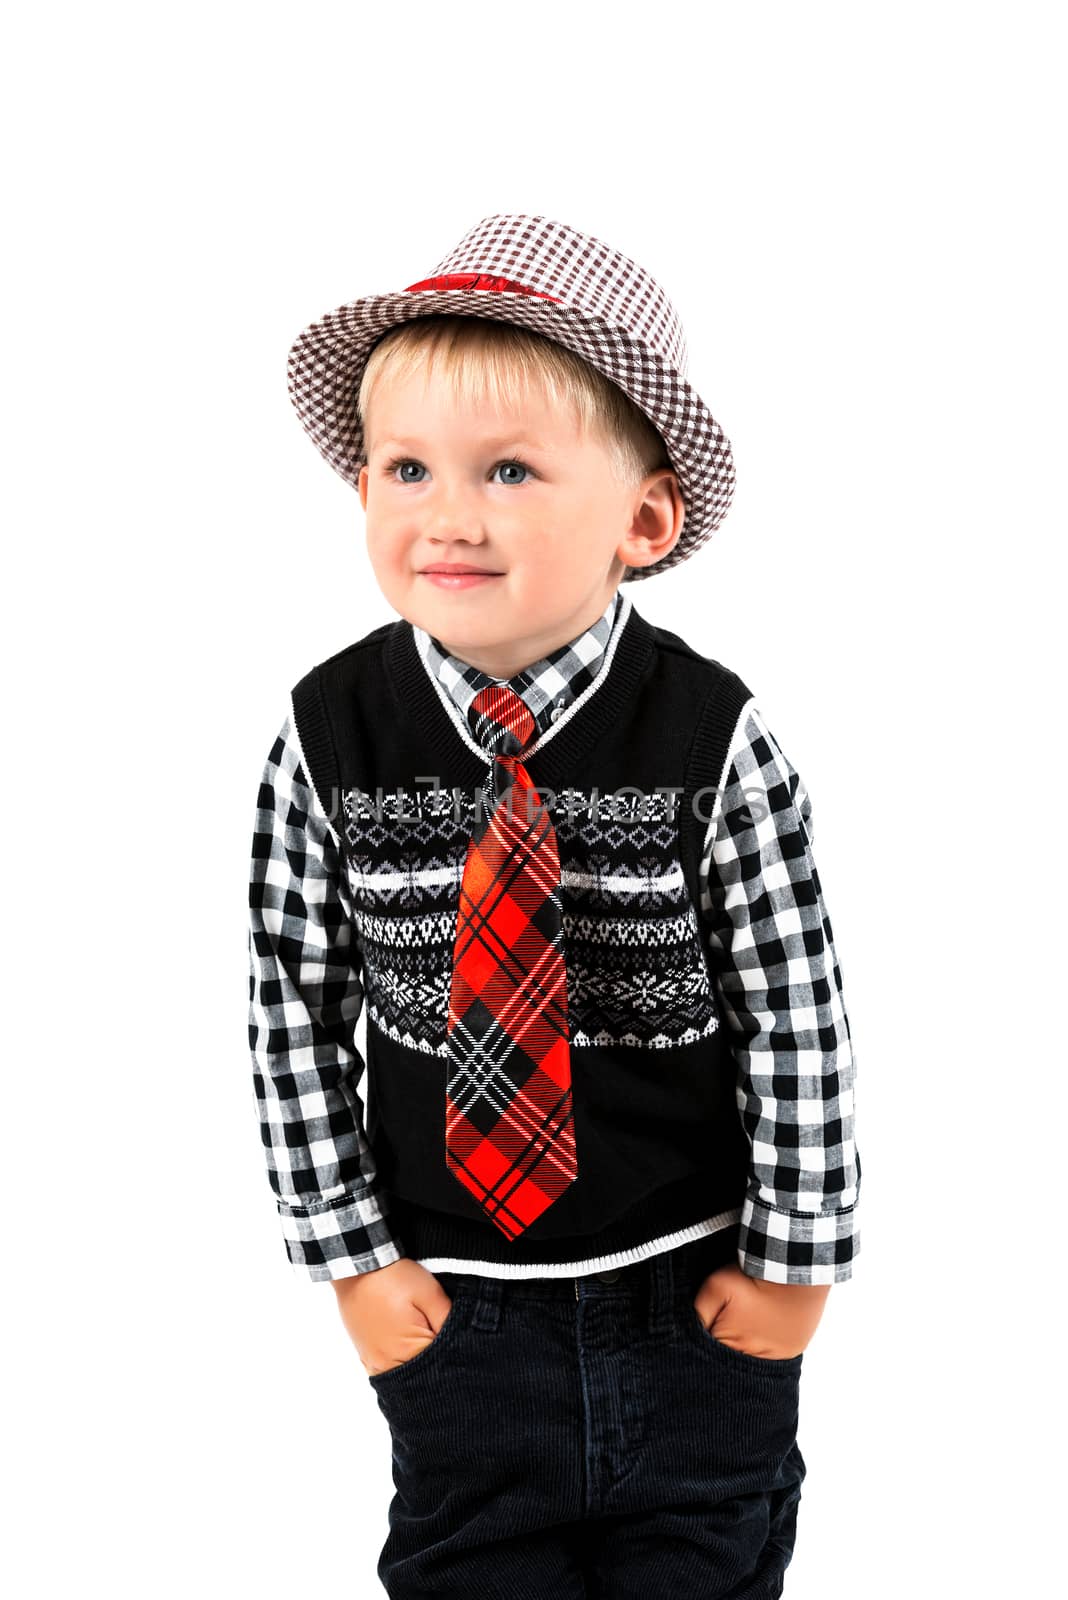 Smiling happy boy in hat and tie shot in the studio on a white b by Nanisimova